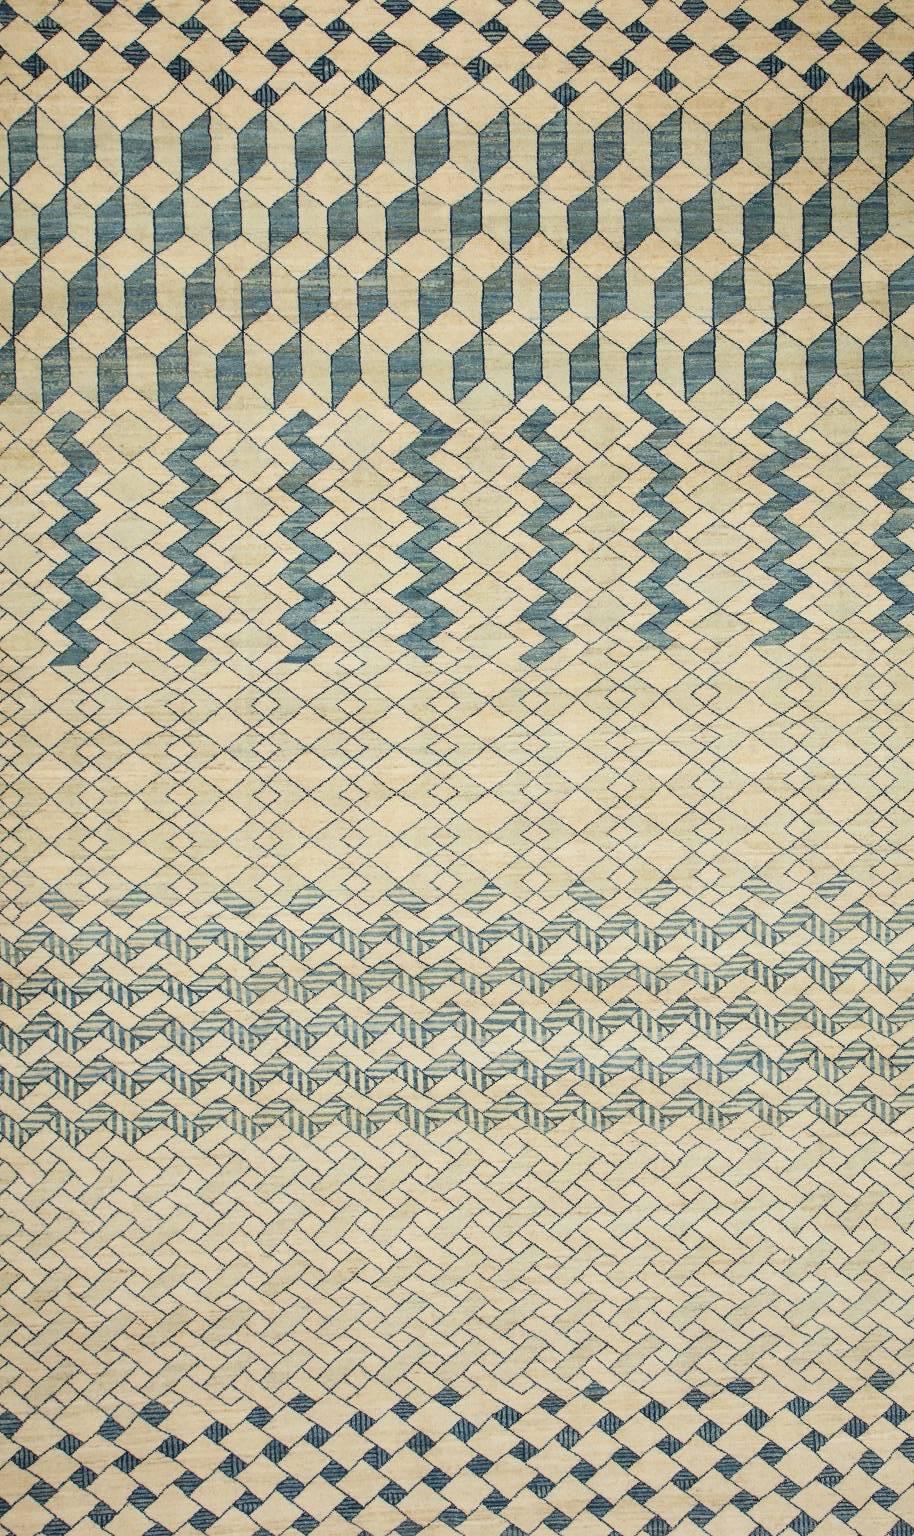 This signature Orley Shabahang carpet in handspun wool and organic vegetable dyes was created using a hand-knotted pile, cotton warp and wool weft. From the Architectural Collection, the design exhibits a striated indigo pattern amid an undyed cream